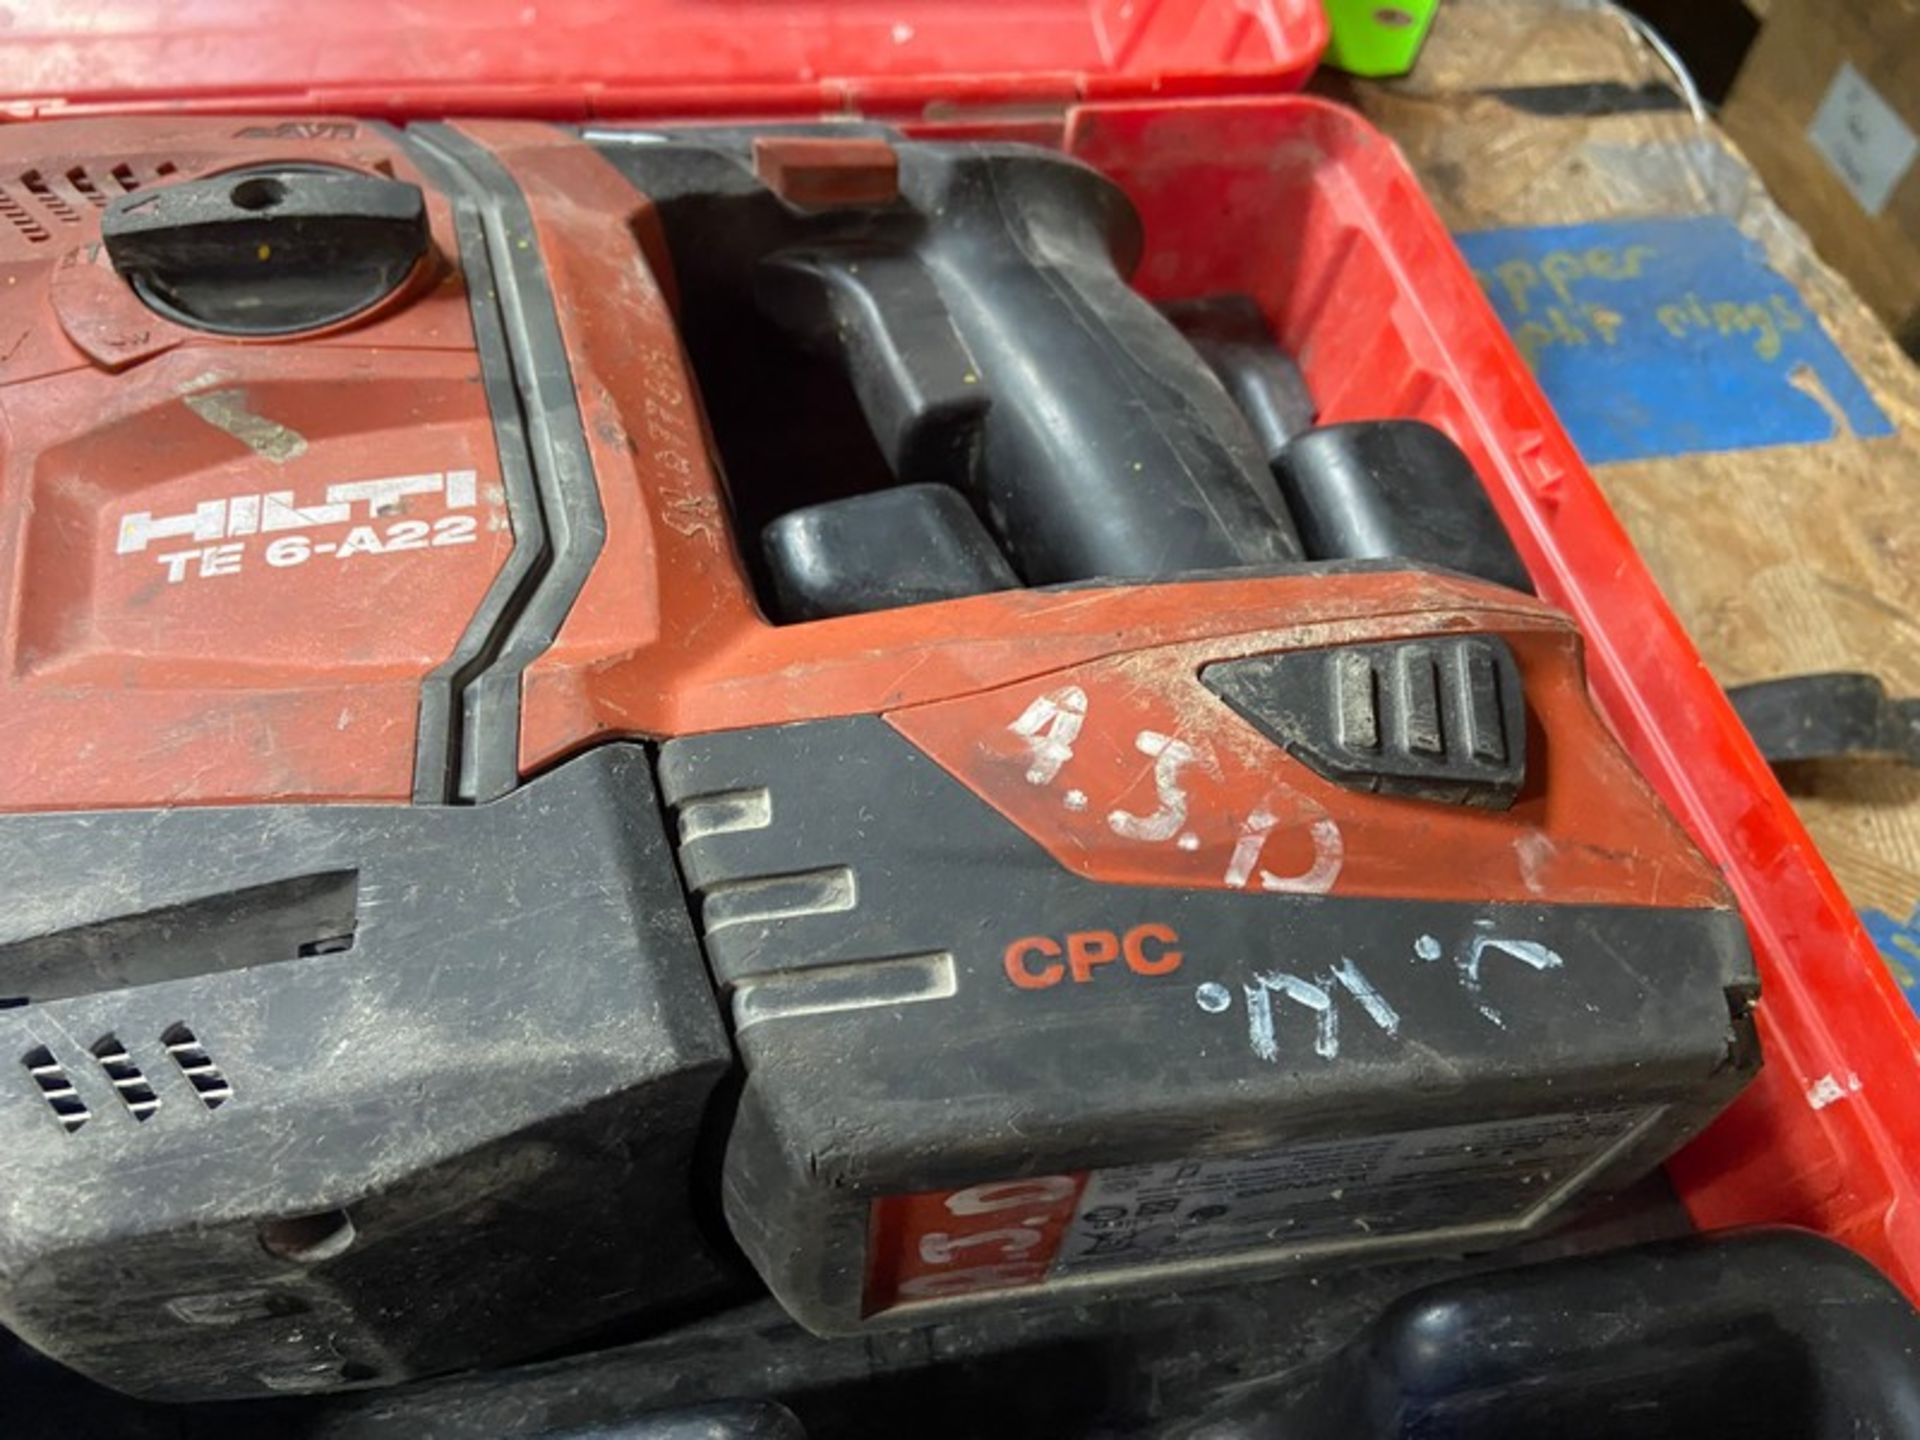 HILTI Cordless Rotary Hammer, M/N TE 6-A22, Includes Dust Removal System, M/N TETS-6-71-CA, with - Image 5 of 14